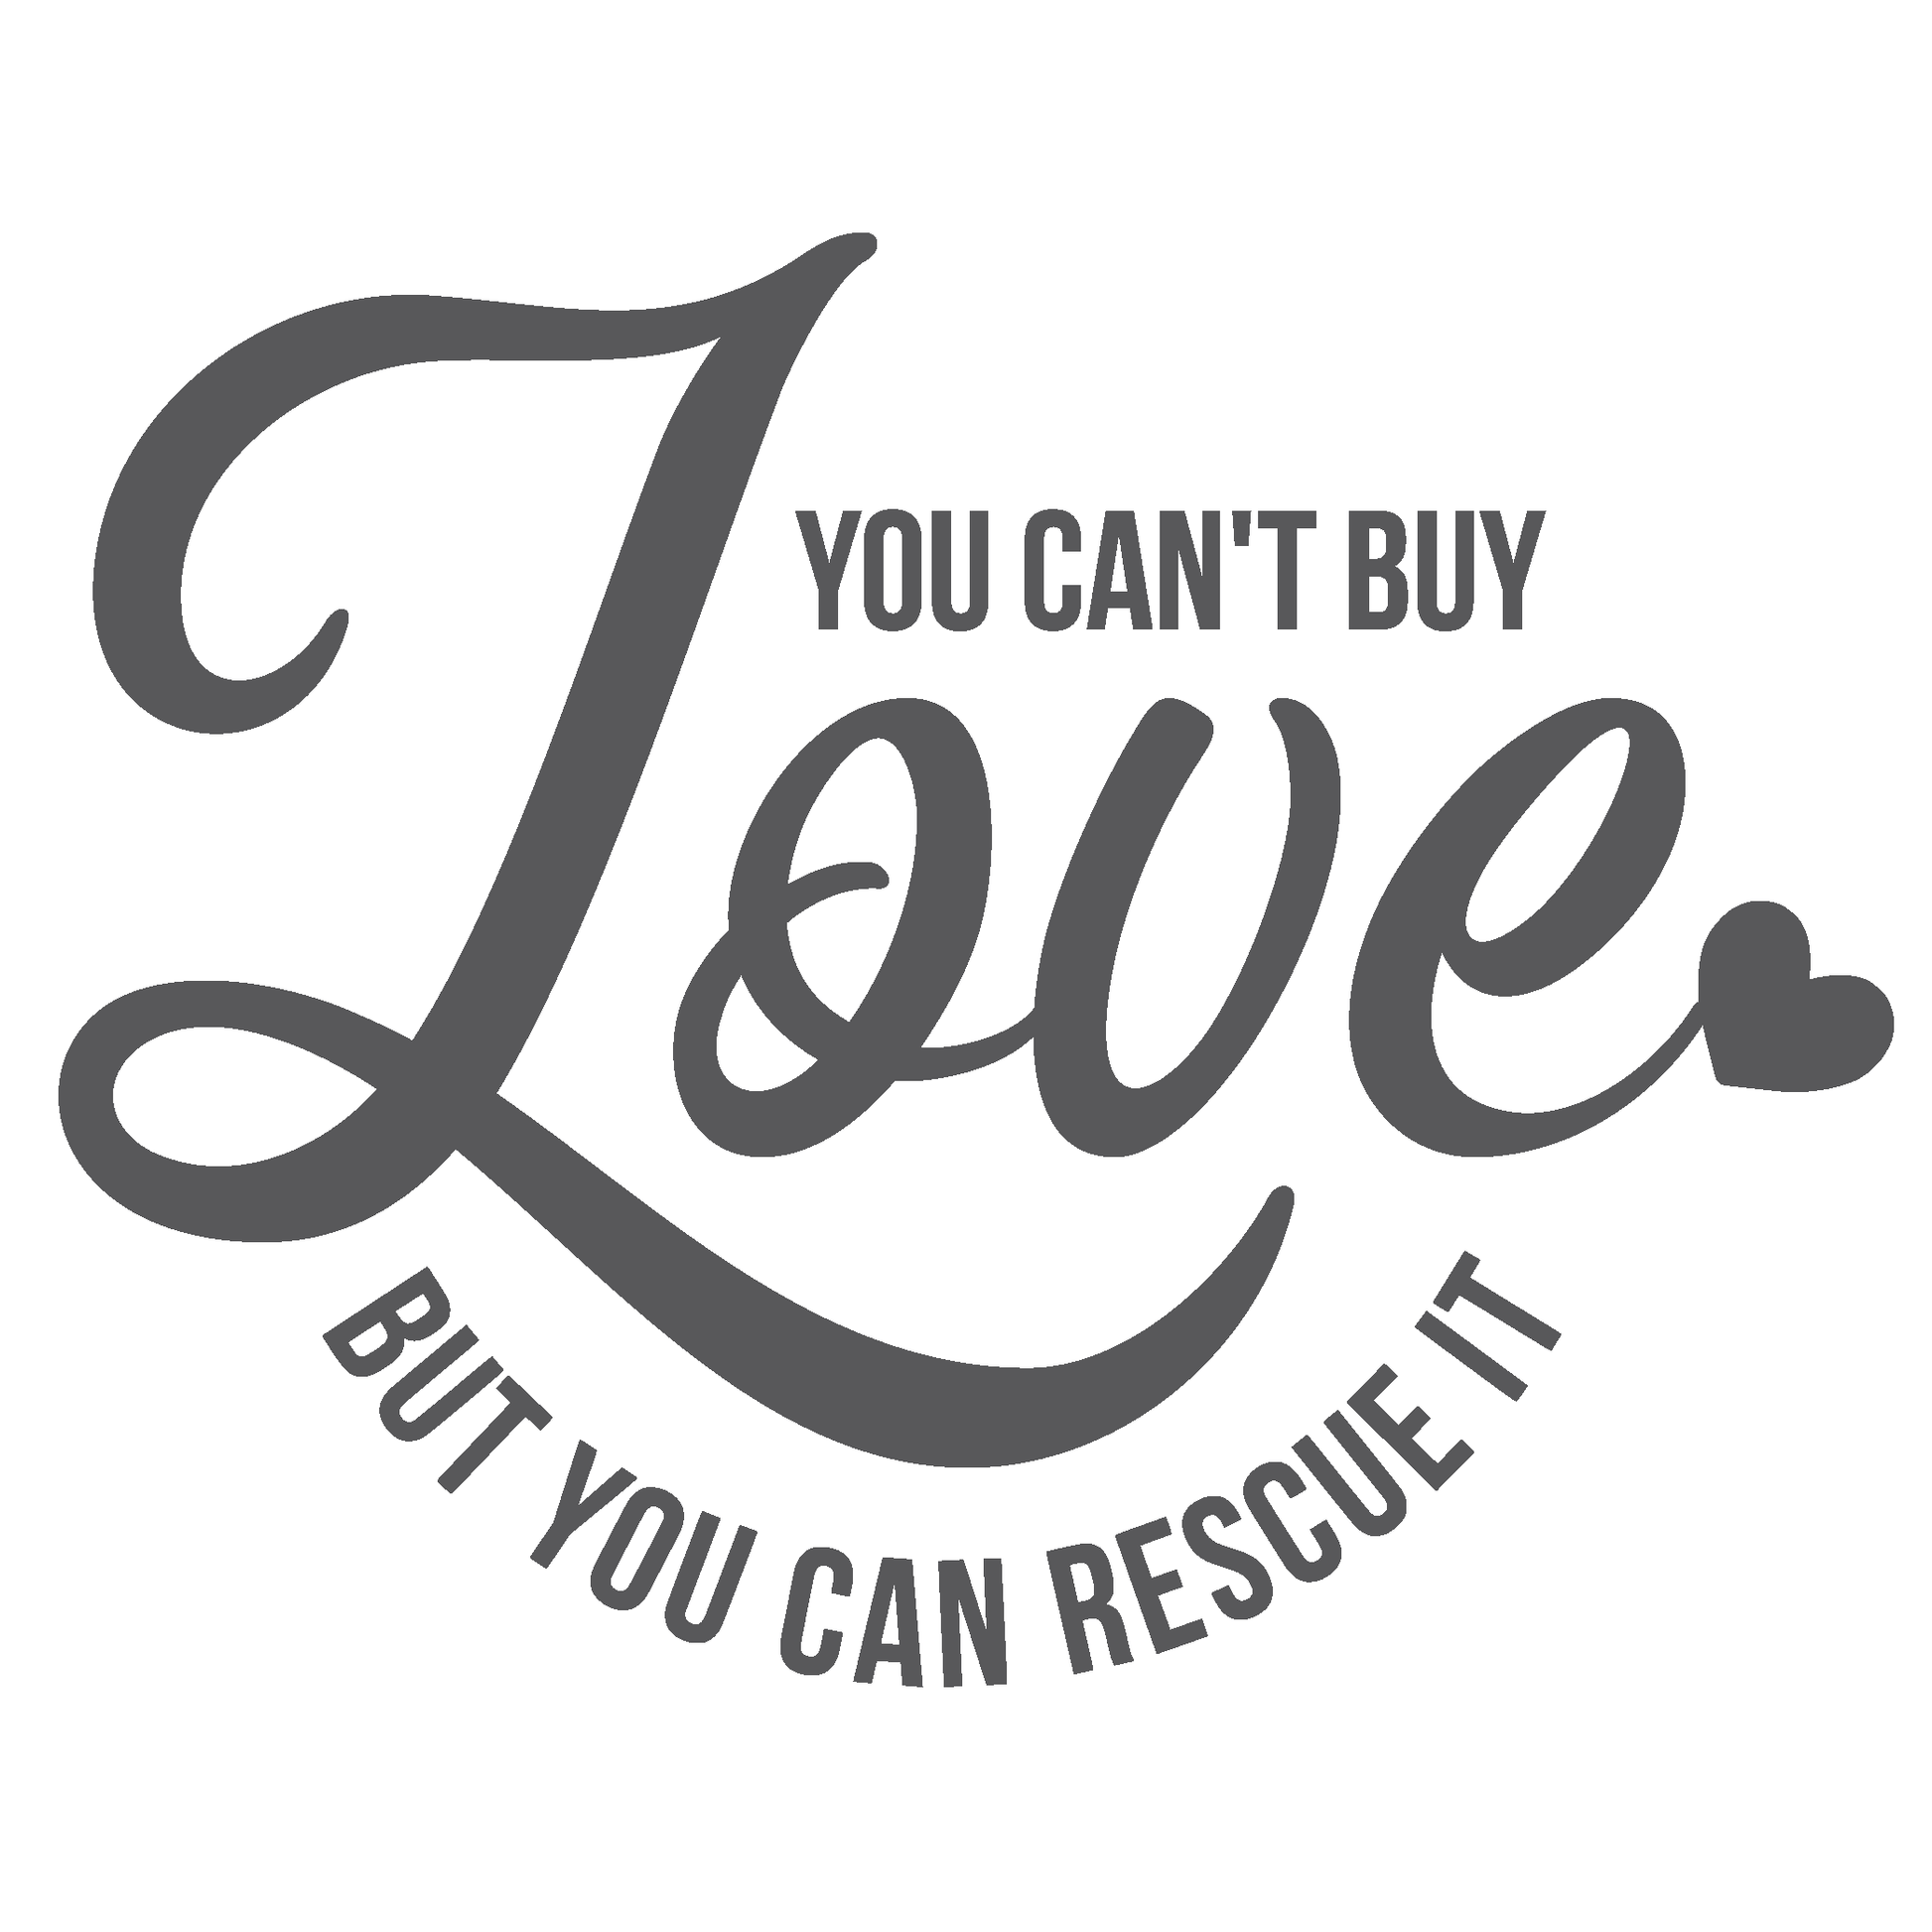 ShopVinylDesignStore.com You Can't Buy Love But You Can Rescue It Wide Shop Vinyl Design decals stickers